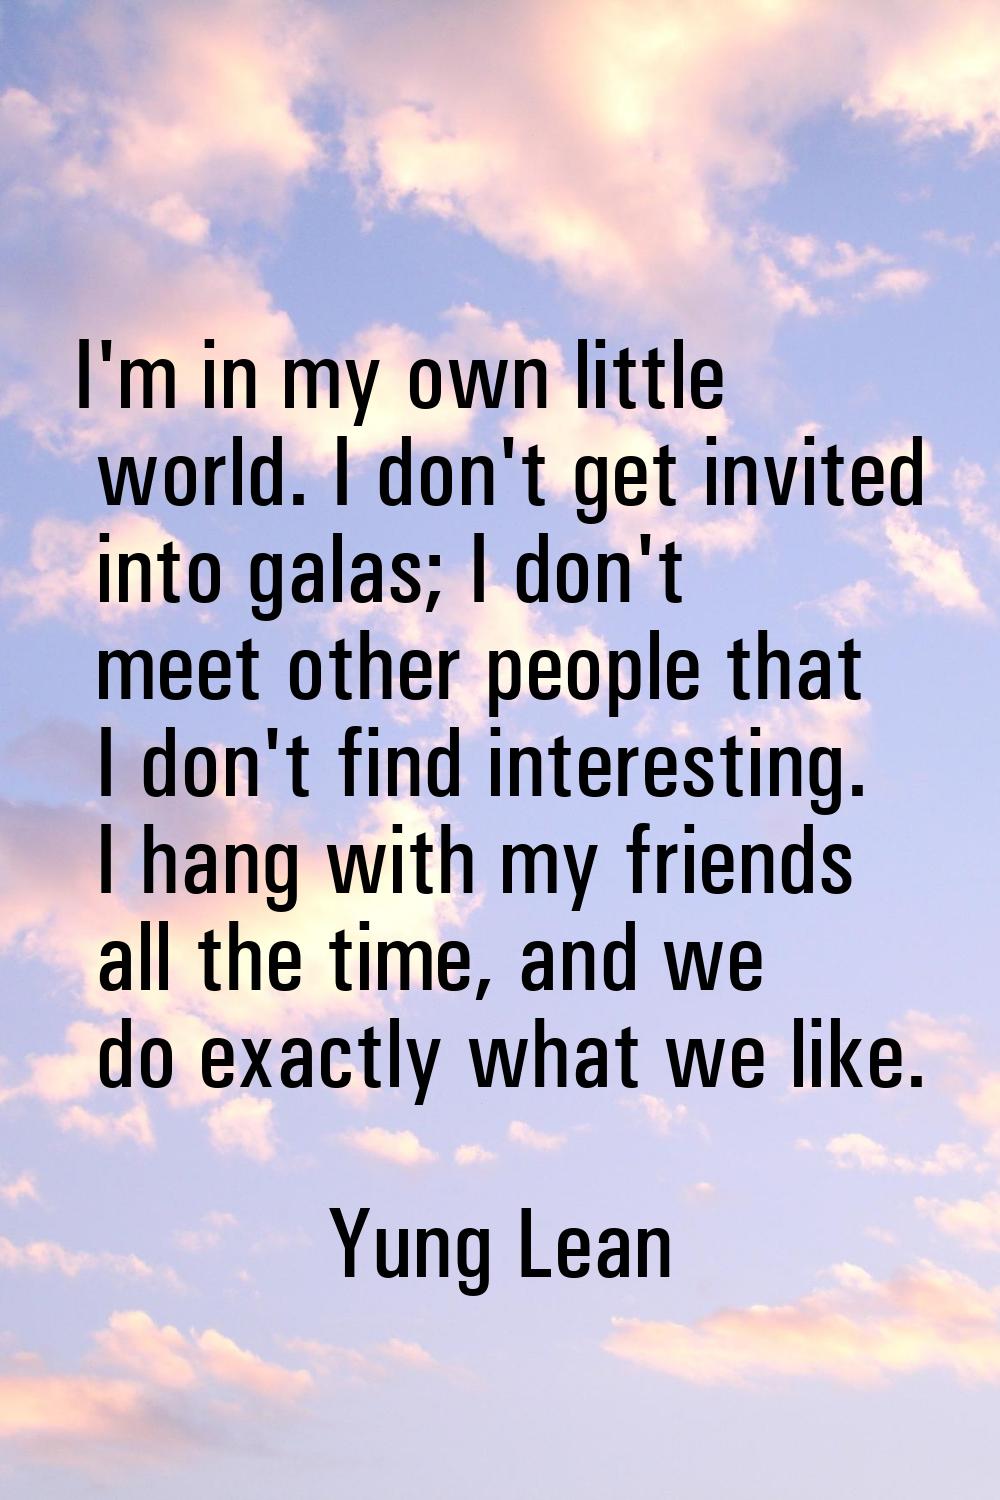 I'm in my own little world. I don't get invited into galas; I don't meet other people that I don't 